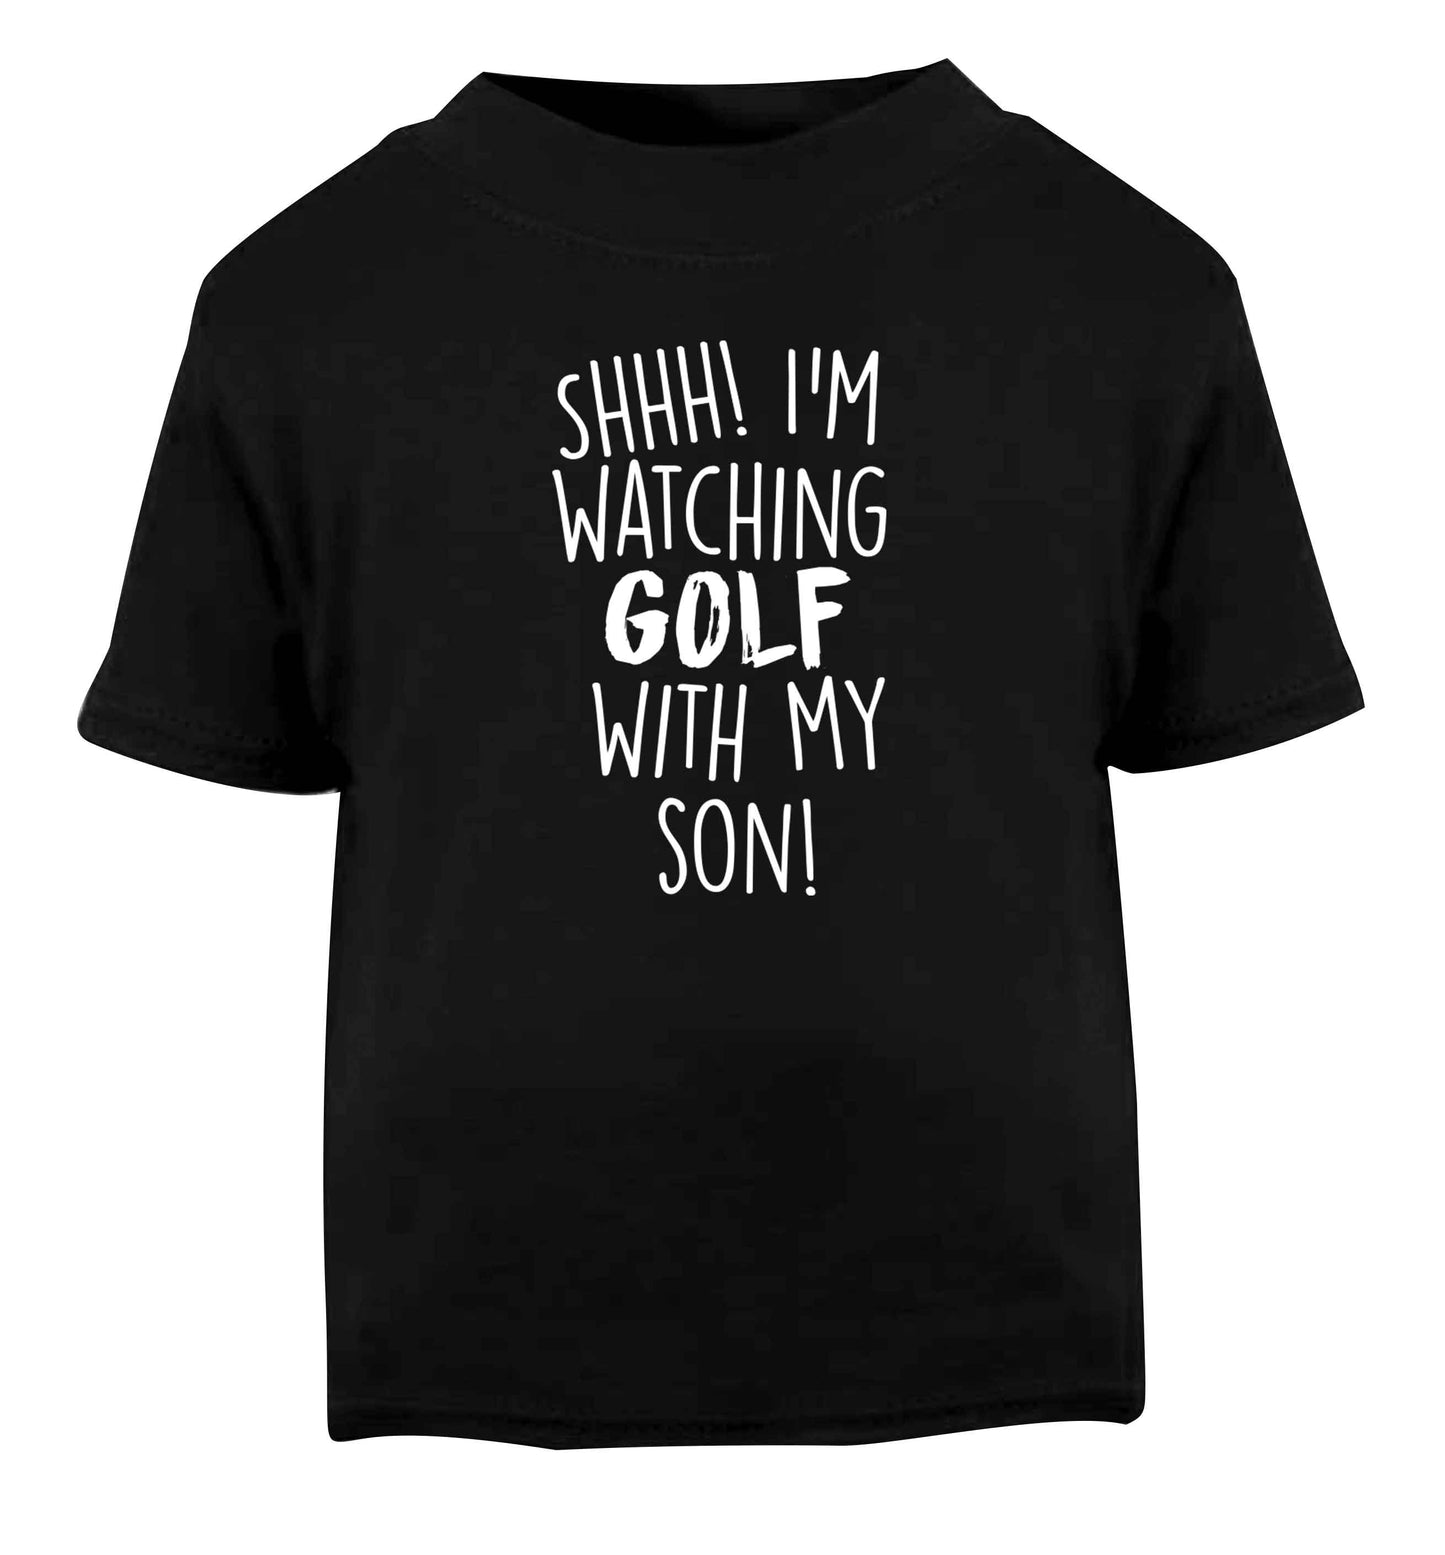 Shh I'm watching golf with my son Black Baby Toddler Tshirt 2 years